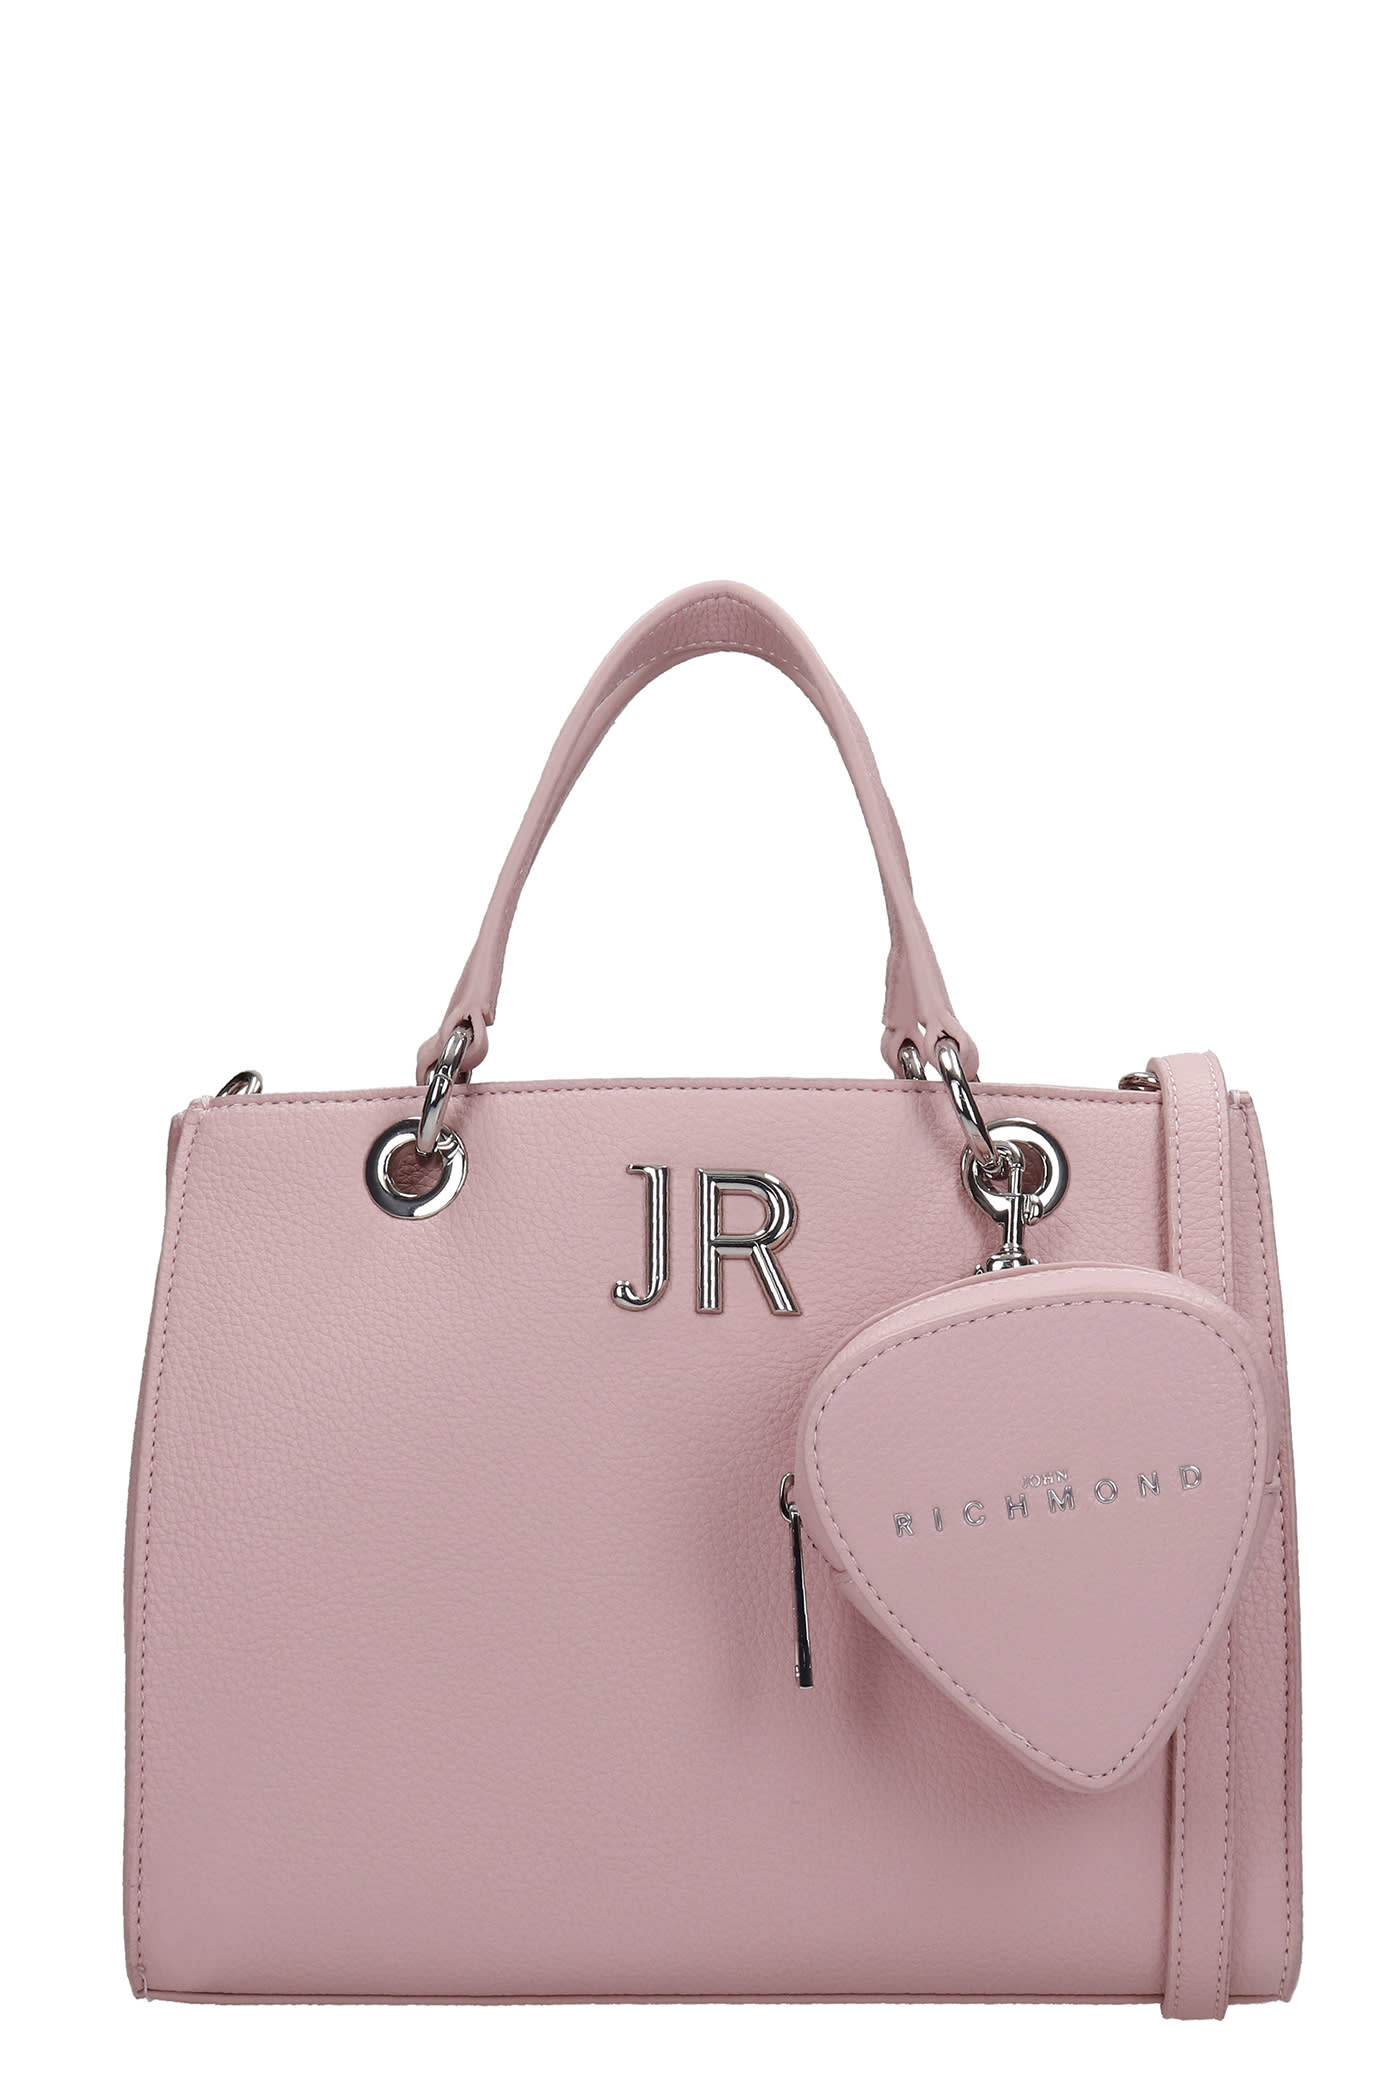 John Richmond Tolin Hand Bag In Rose-pink Faux Leather